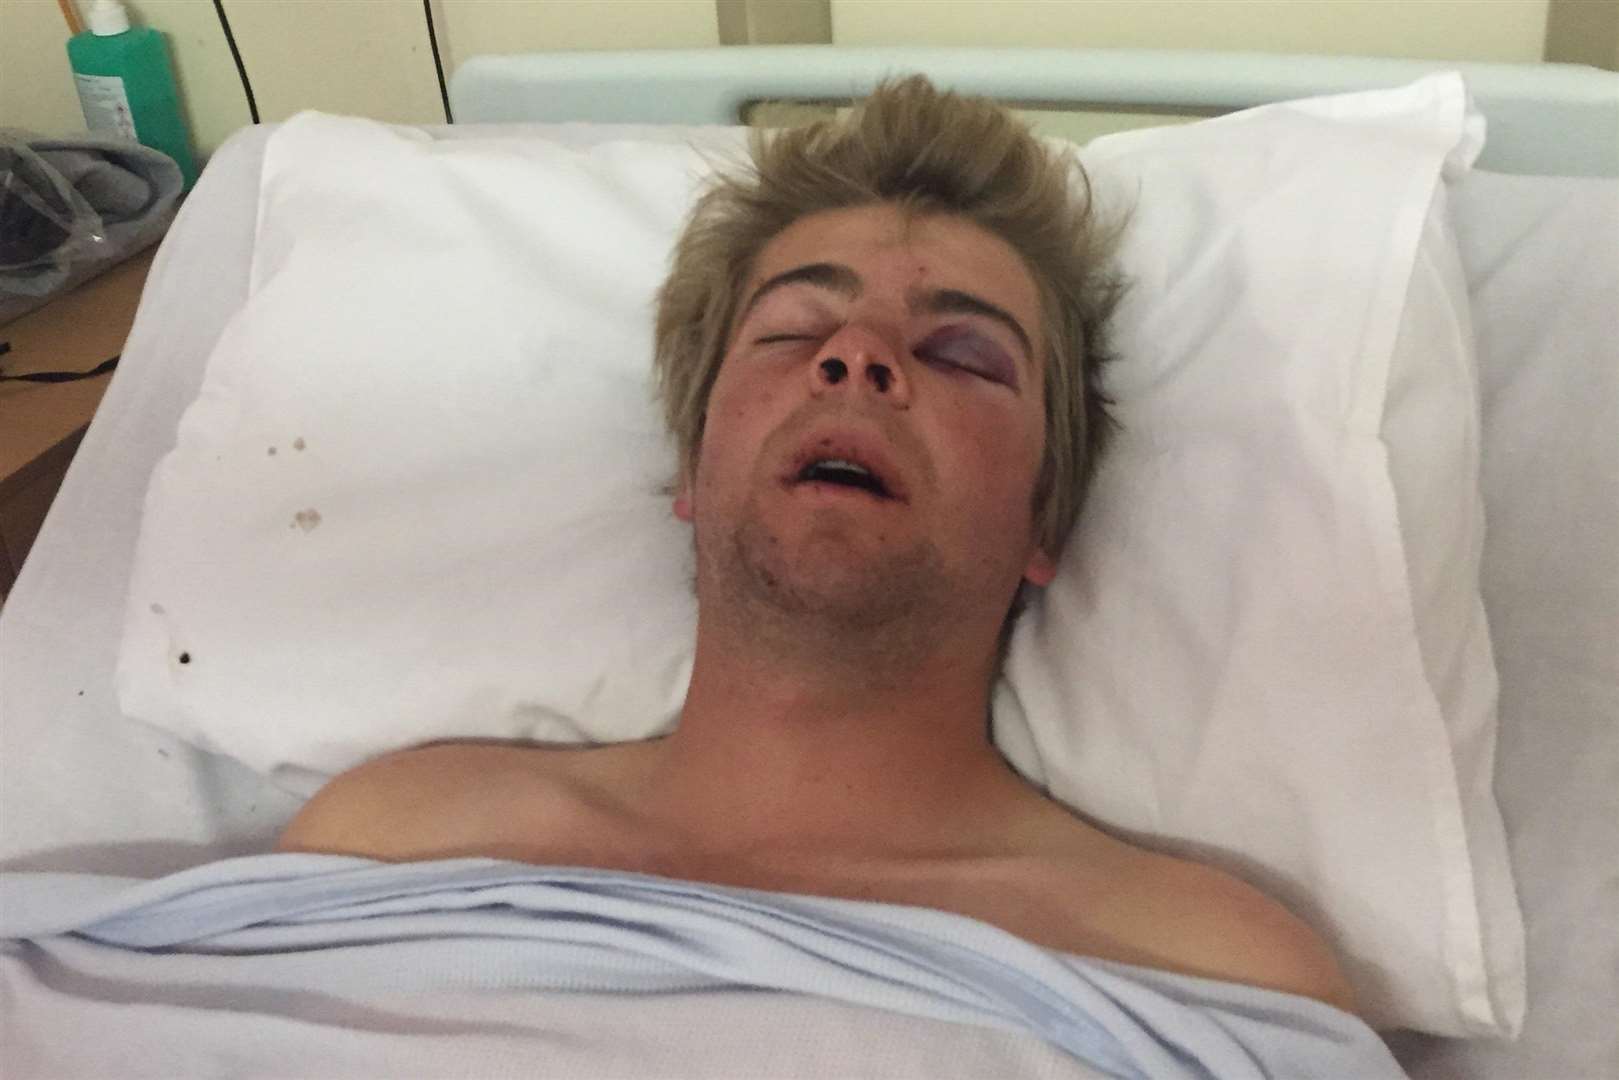 Josh in hospital after the attack